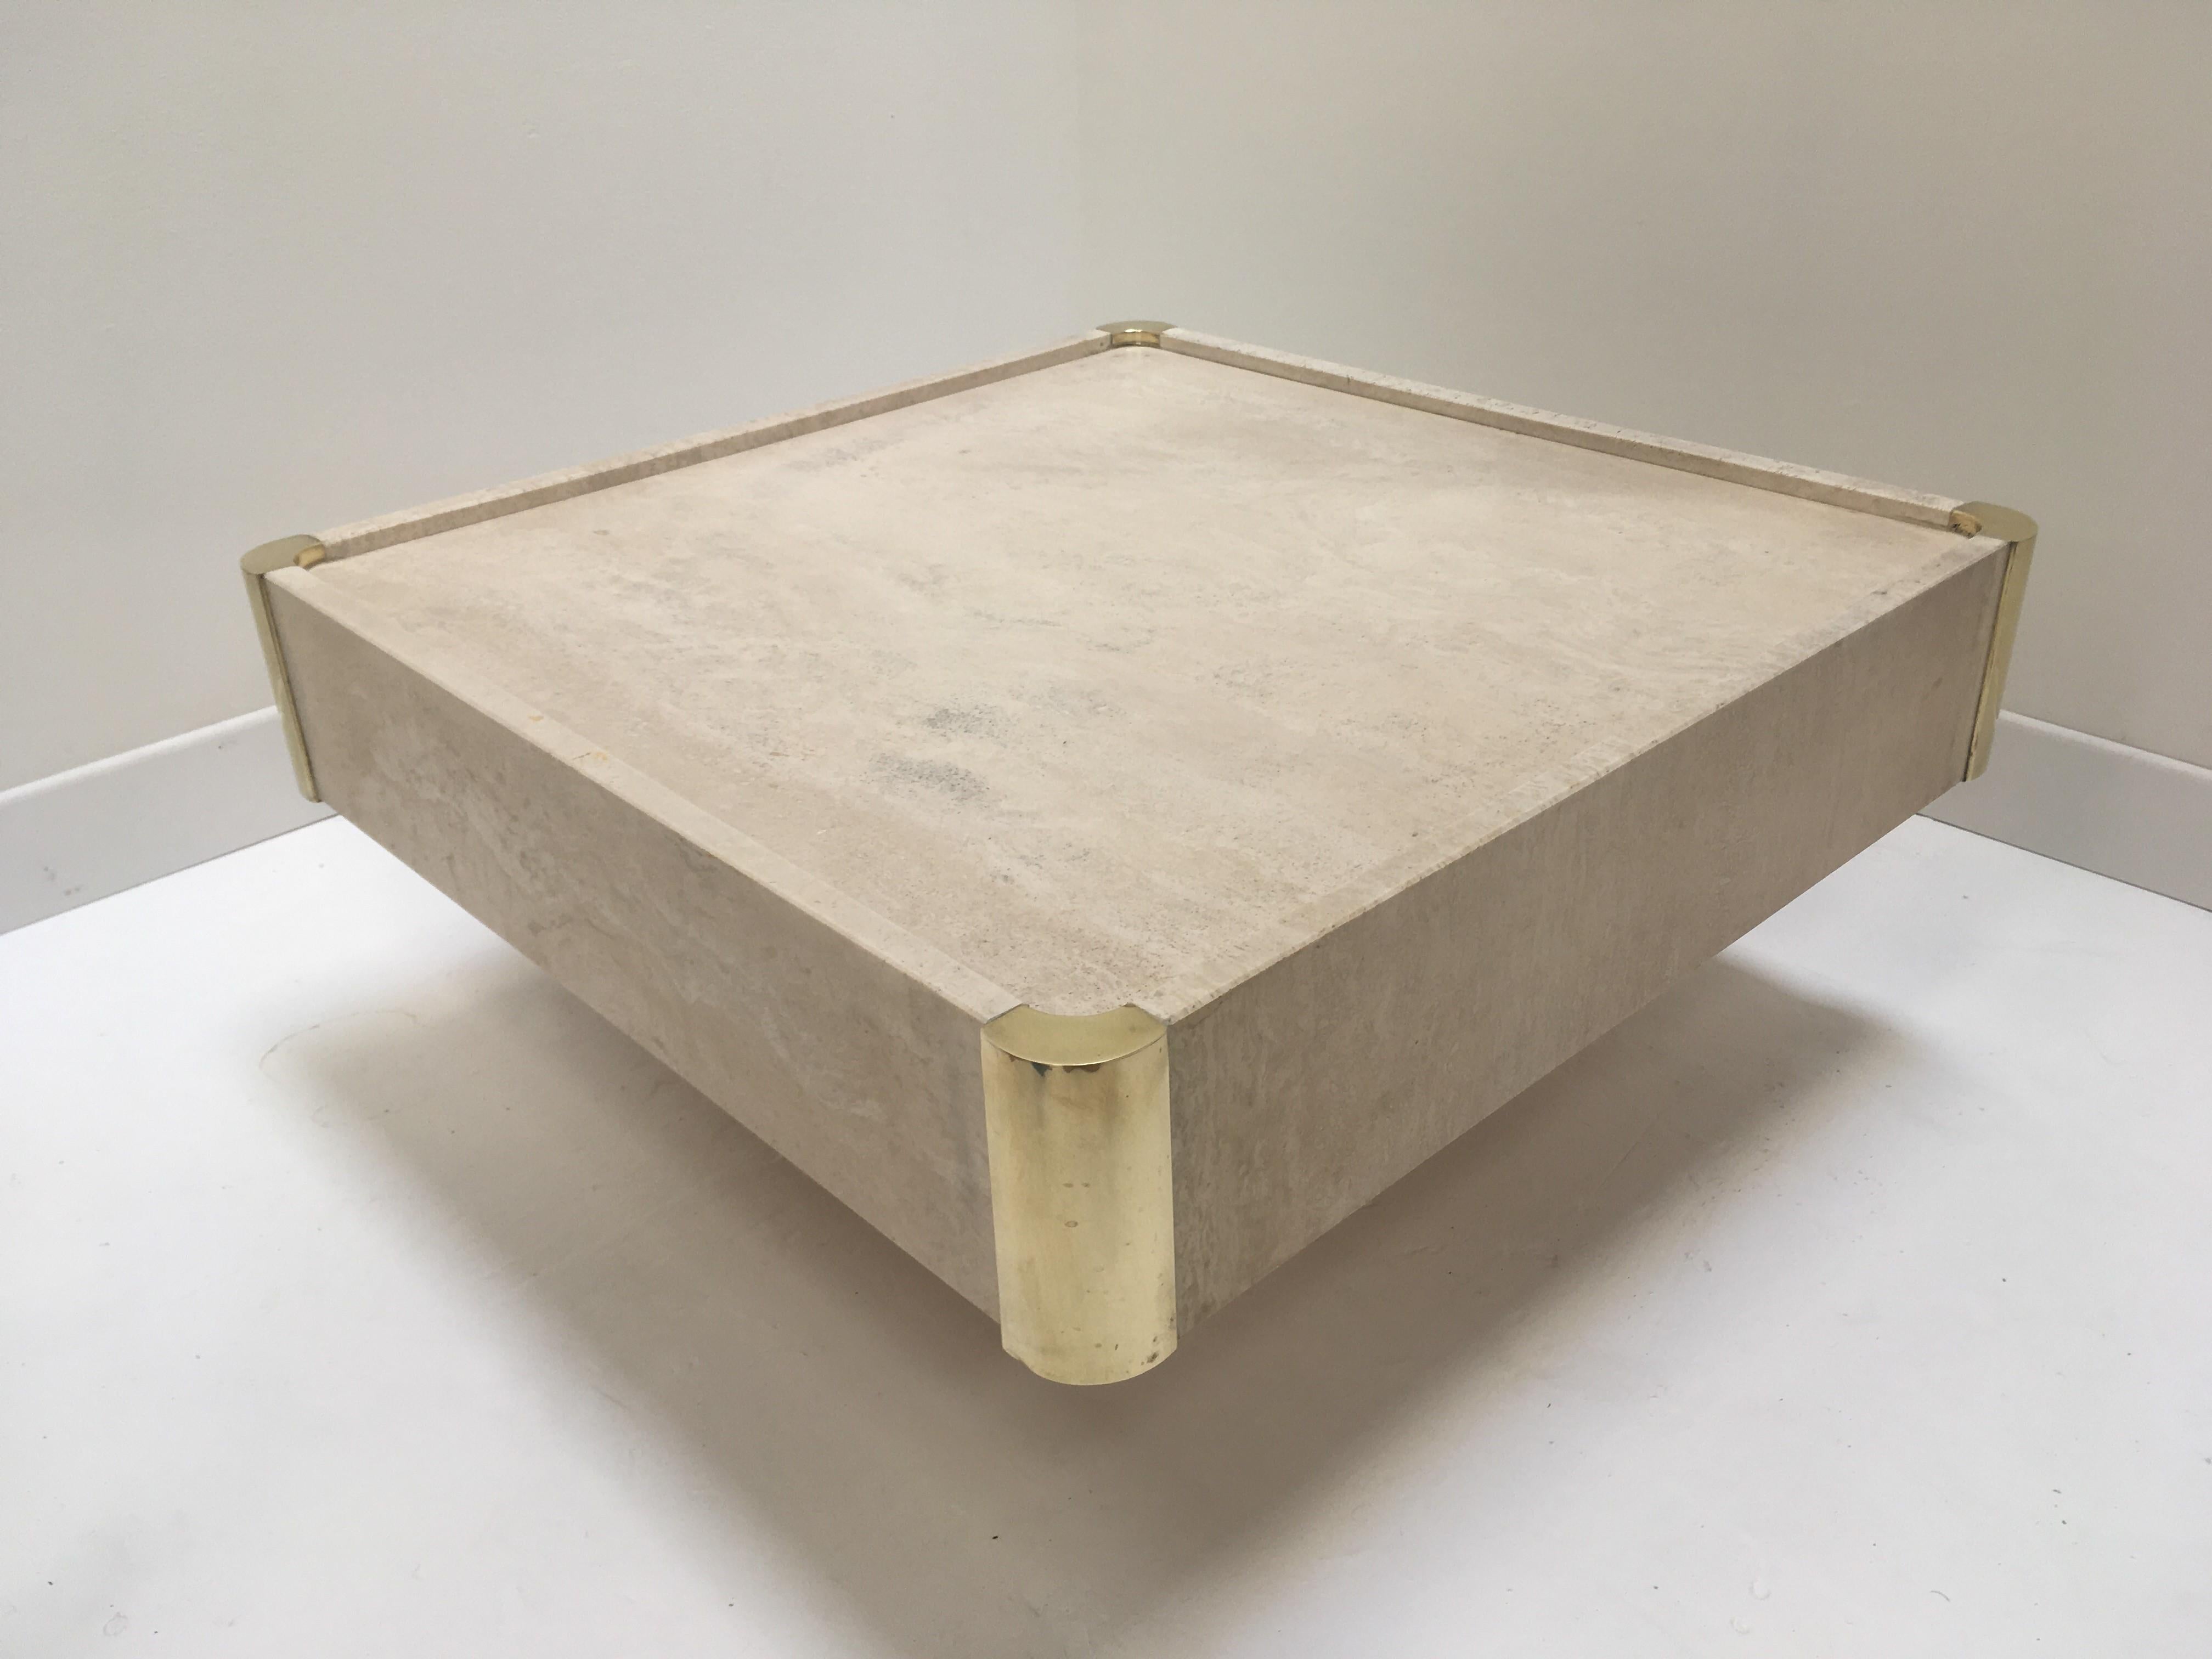 Italian Willy Rizzo 1970s design coffee table, you will be seduced by the charm, the elegance and the presence of this coffee table consisted on a square travertine removal tray adorned with brass corner and a matching square base. All in harmonious